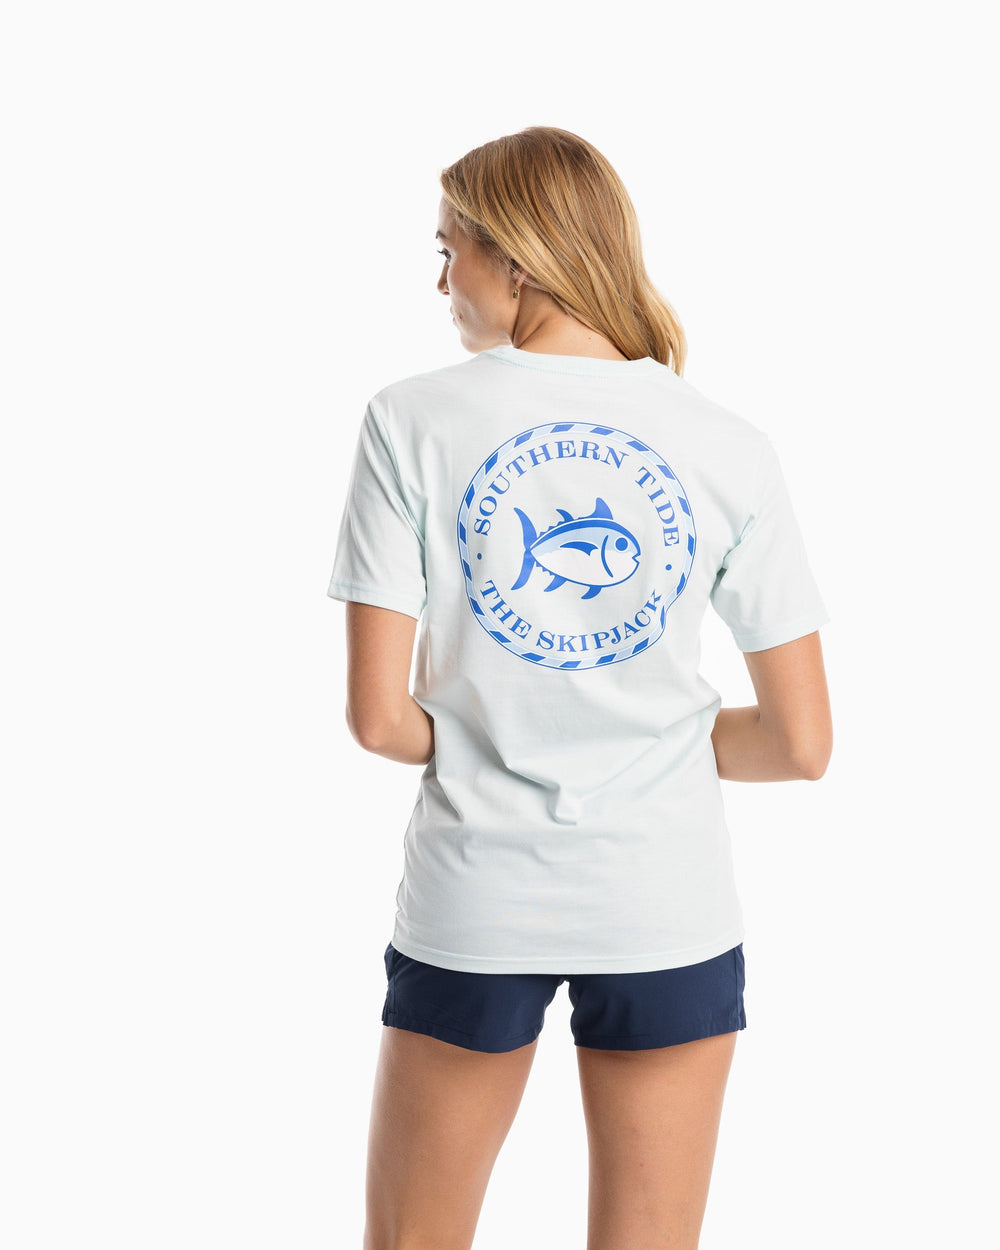 The model back view of the Women's Original Skipjack Medallion T-Shirt by Southern Tide - Turquoise Mist